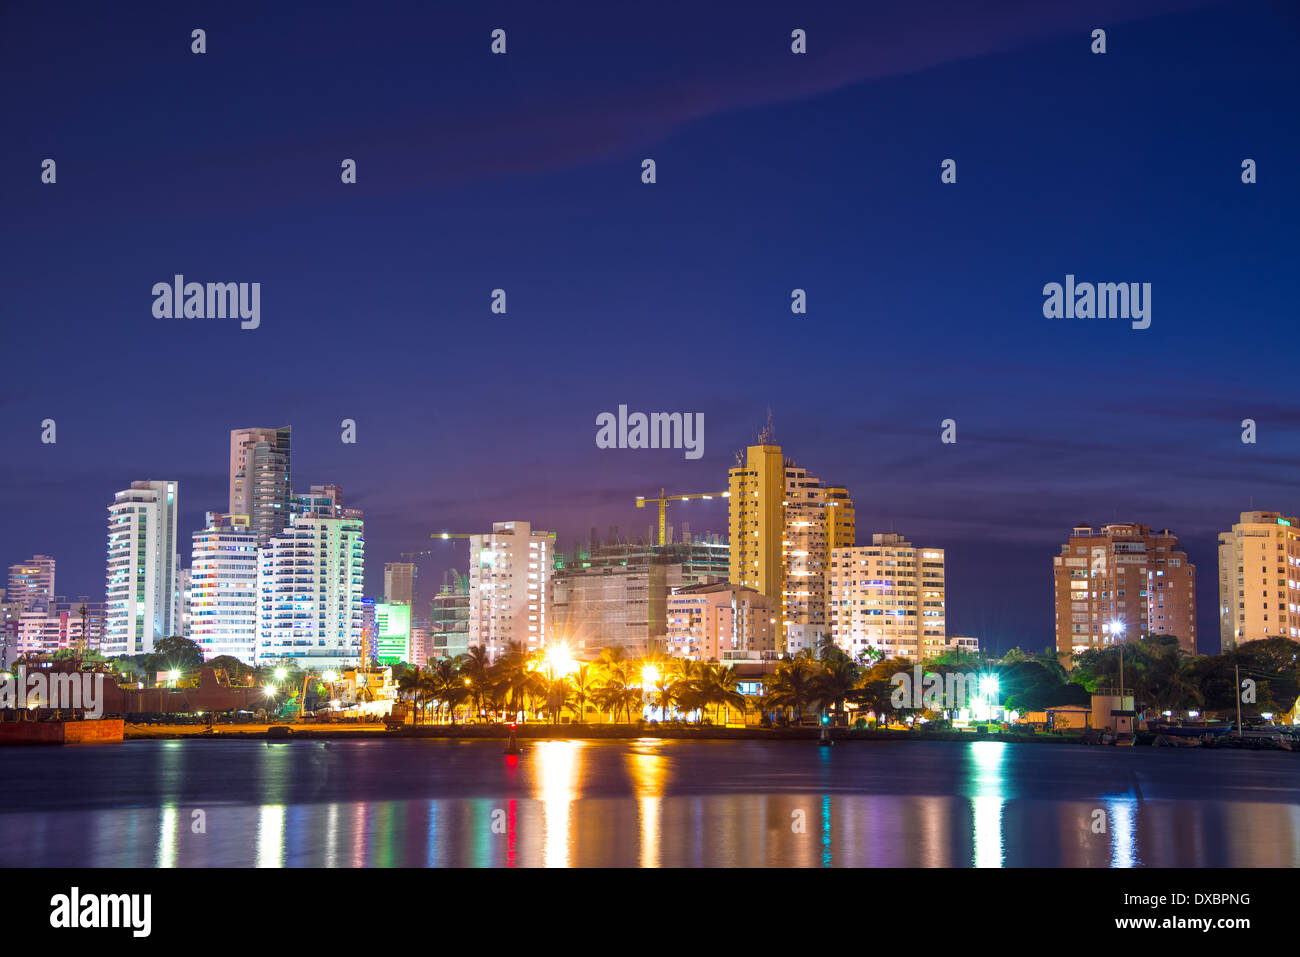 Nighttime view of the modern part of Cartagena, Colombia Stock Photo